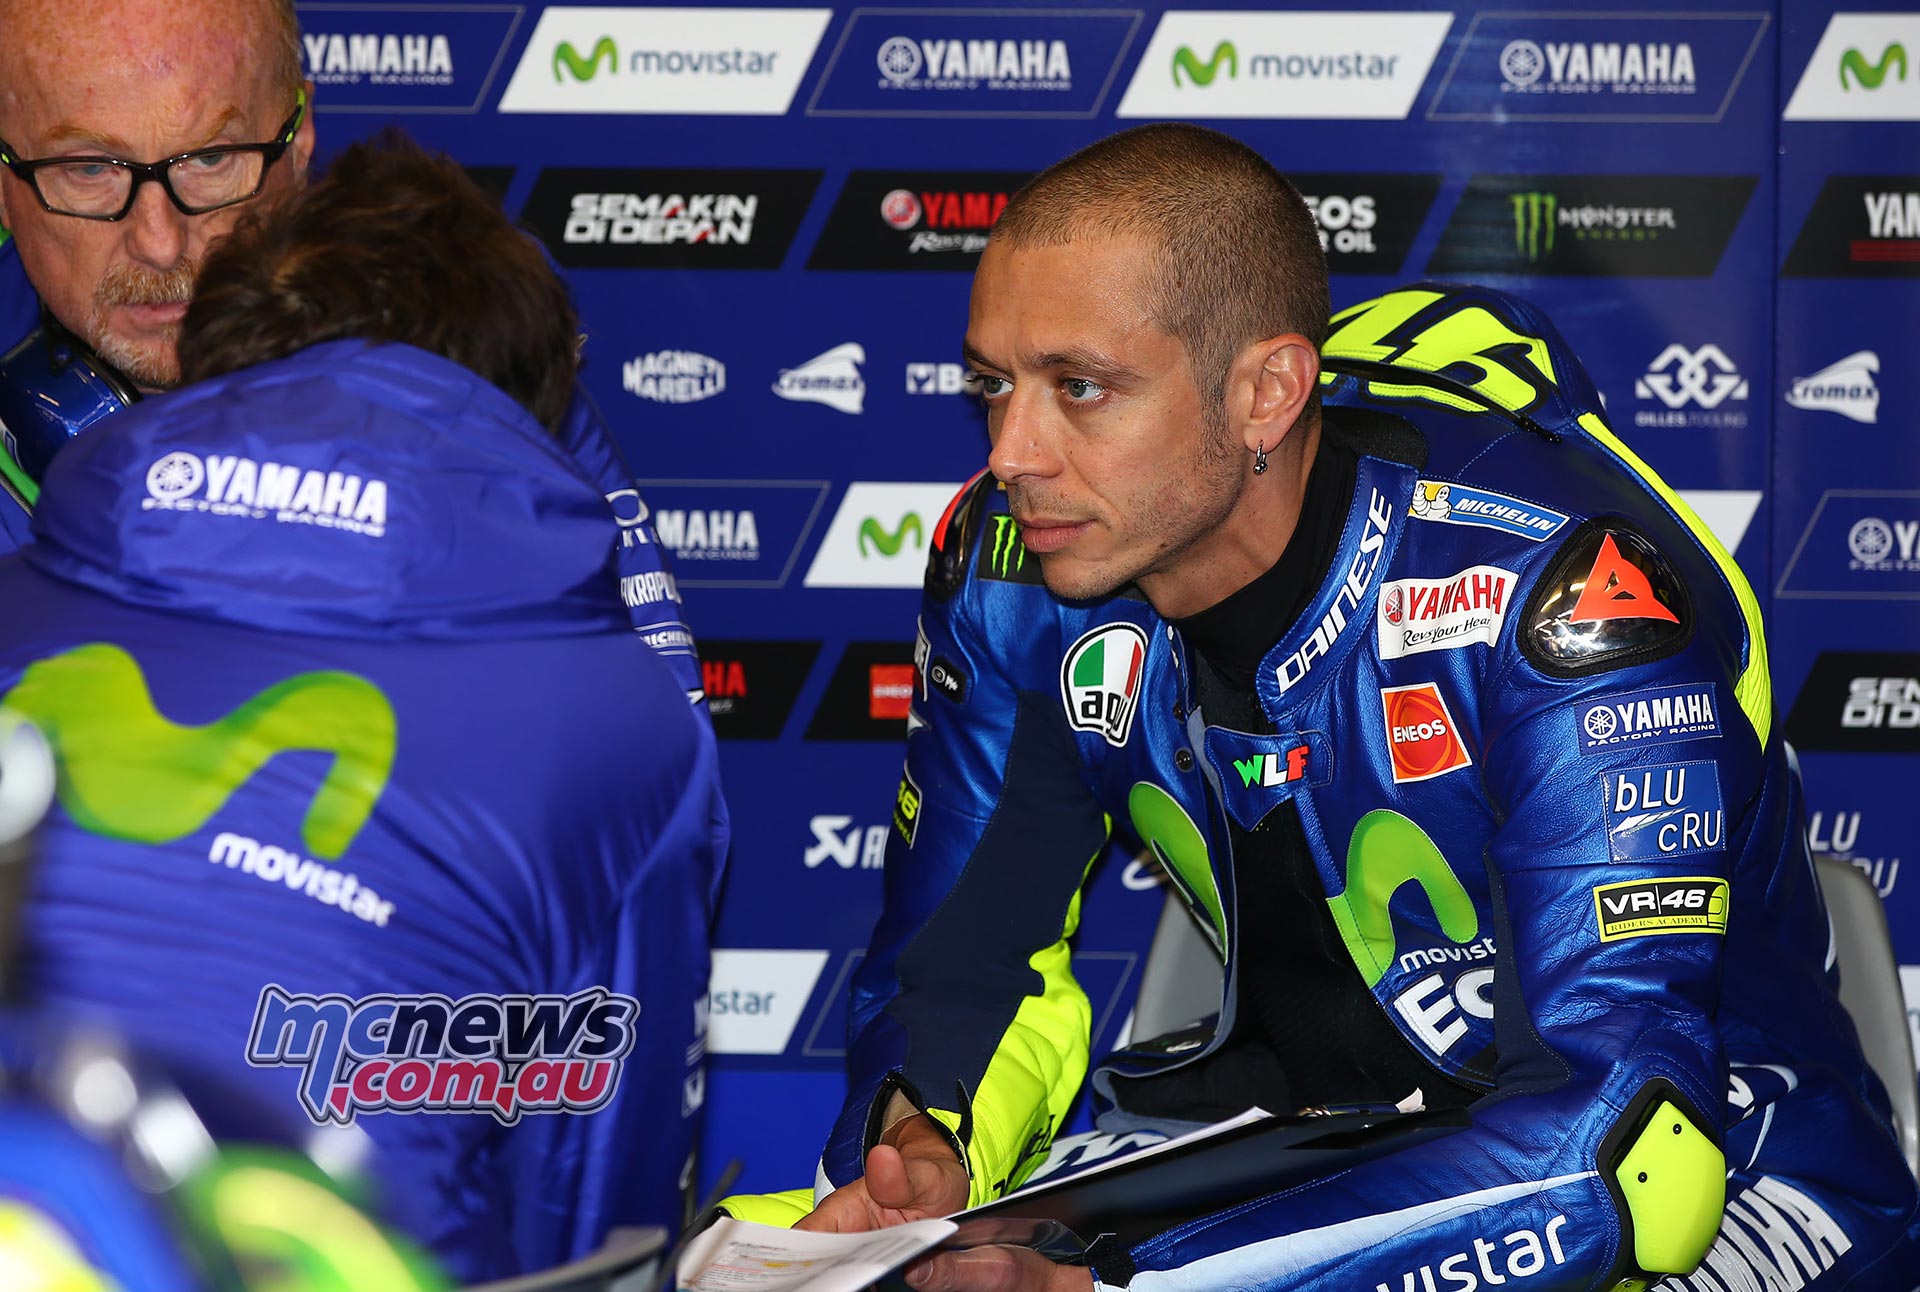 Valentino Rossi injured in Motocross accident | MCNews